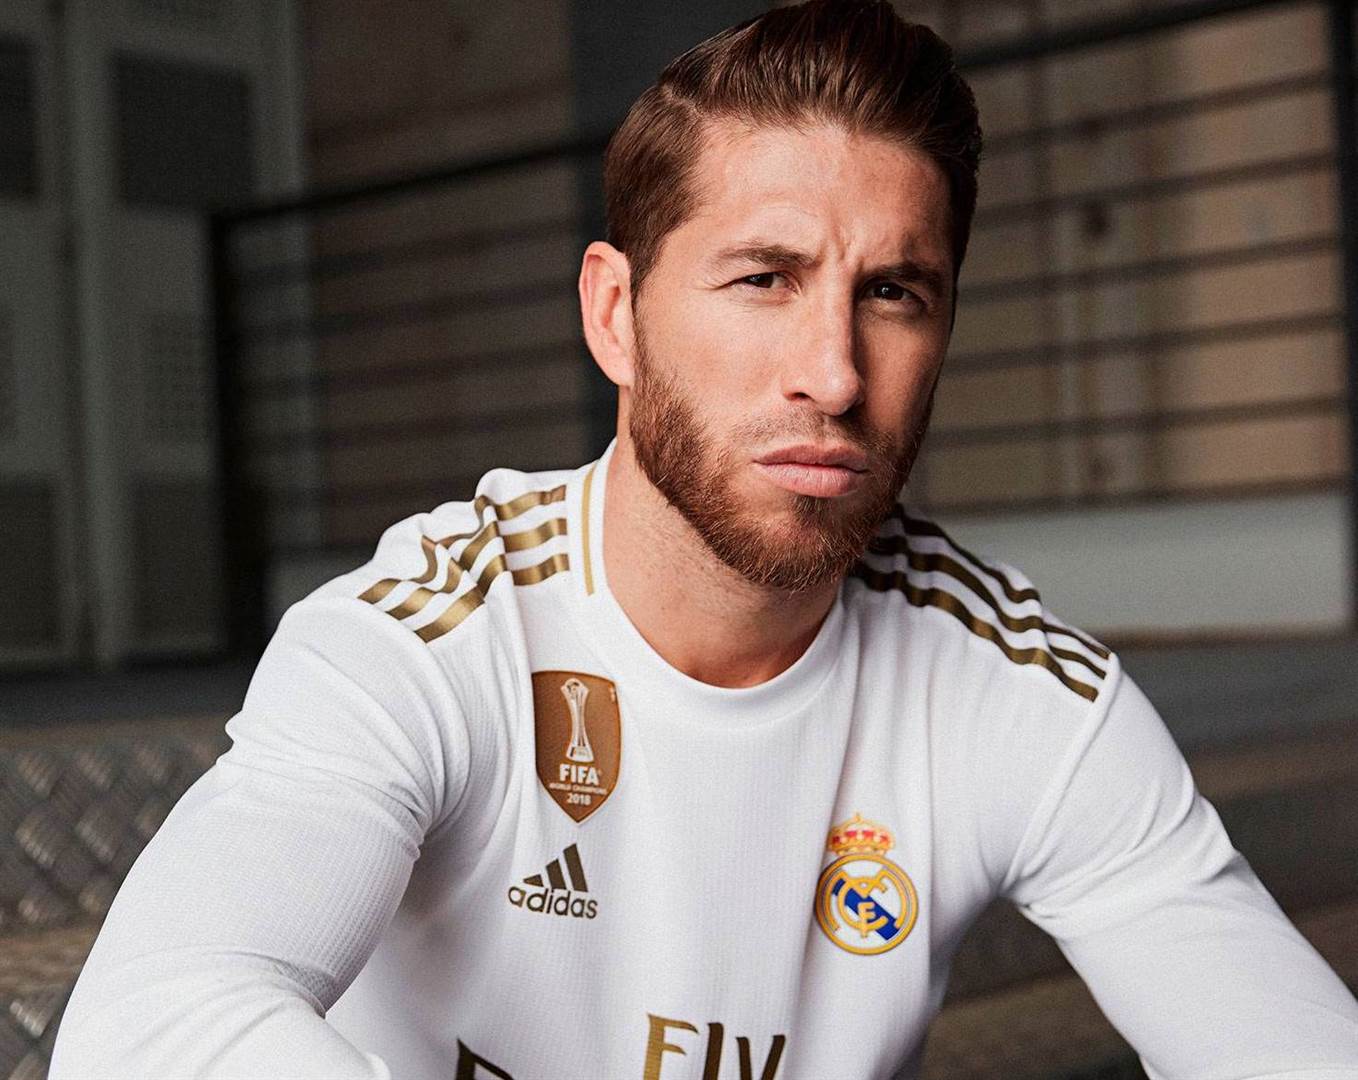 In pictures: Real Madrid's new home kit for 2019/20 - Foto 7 de 10